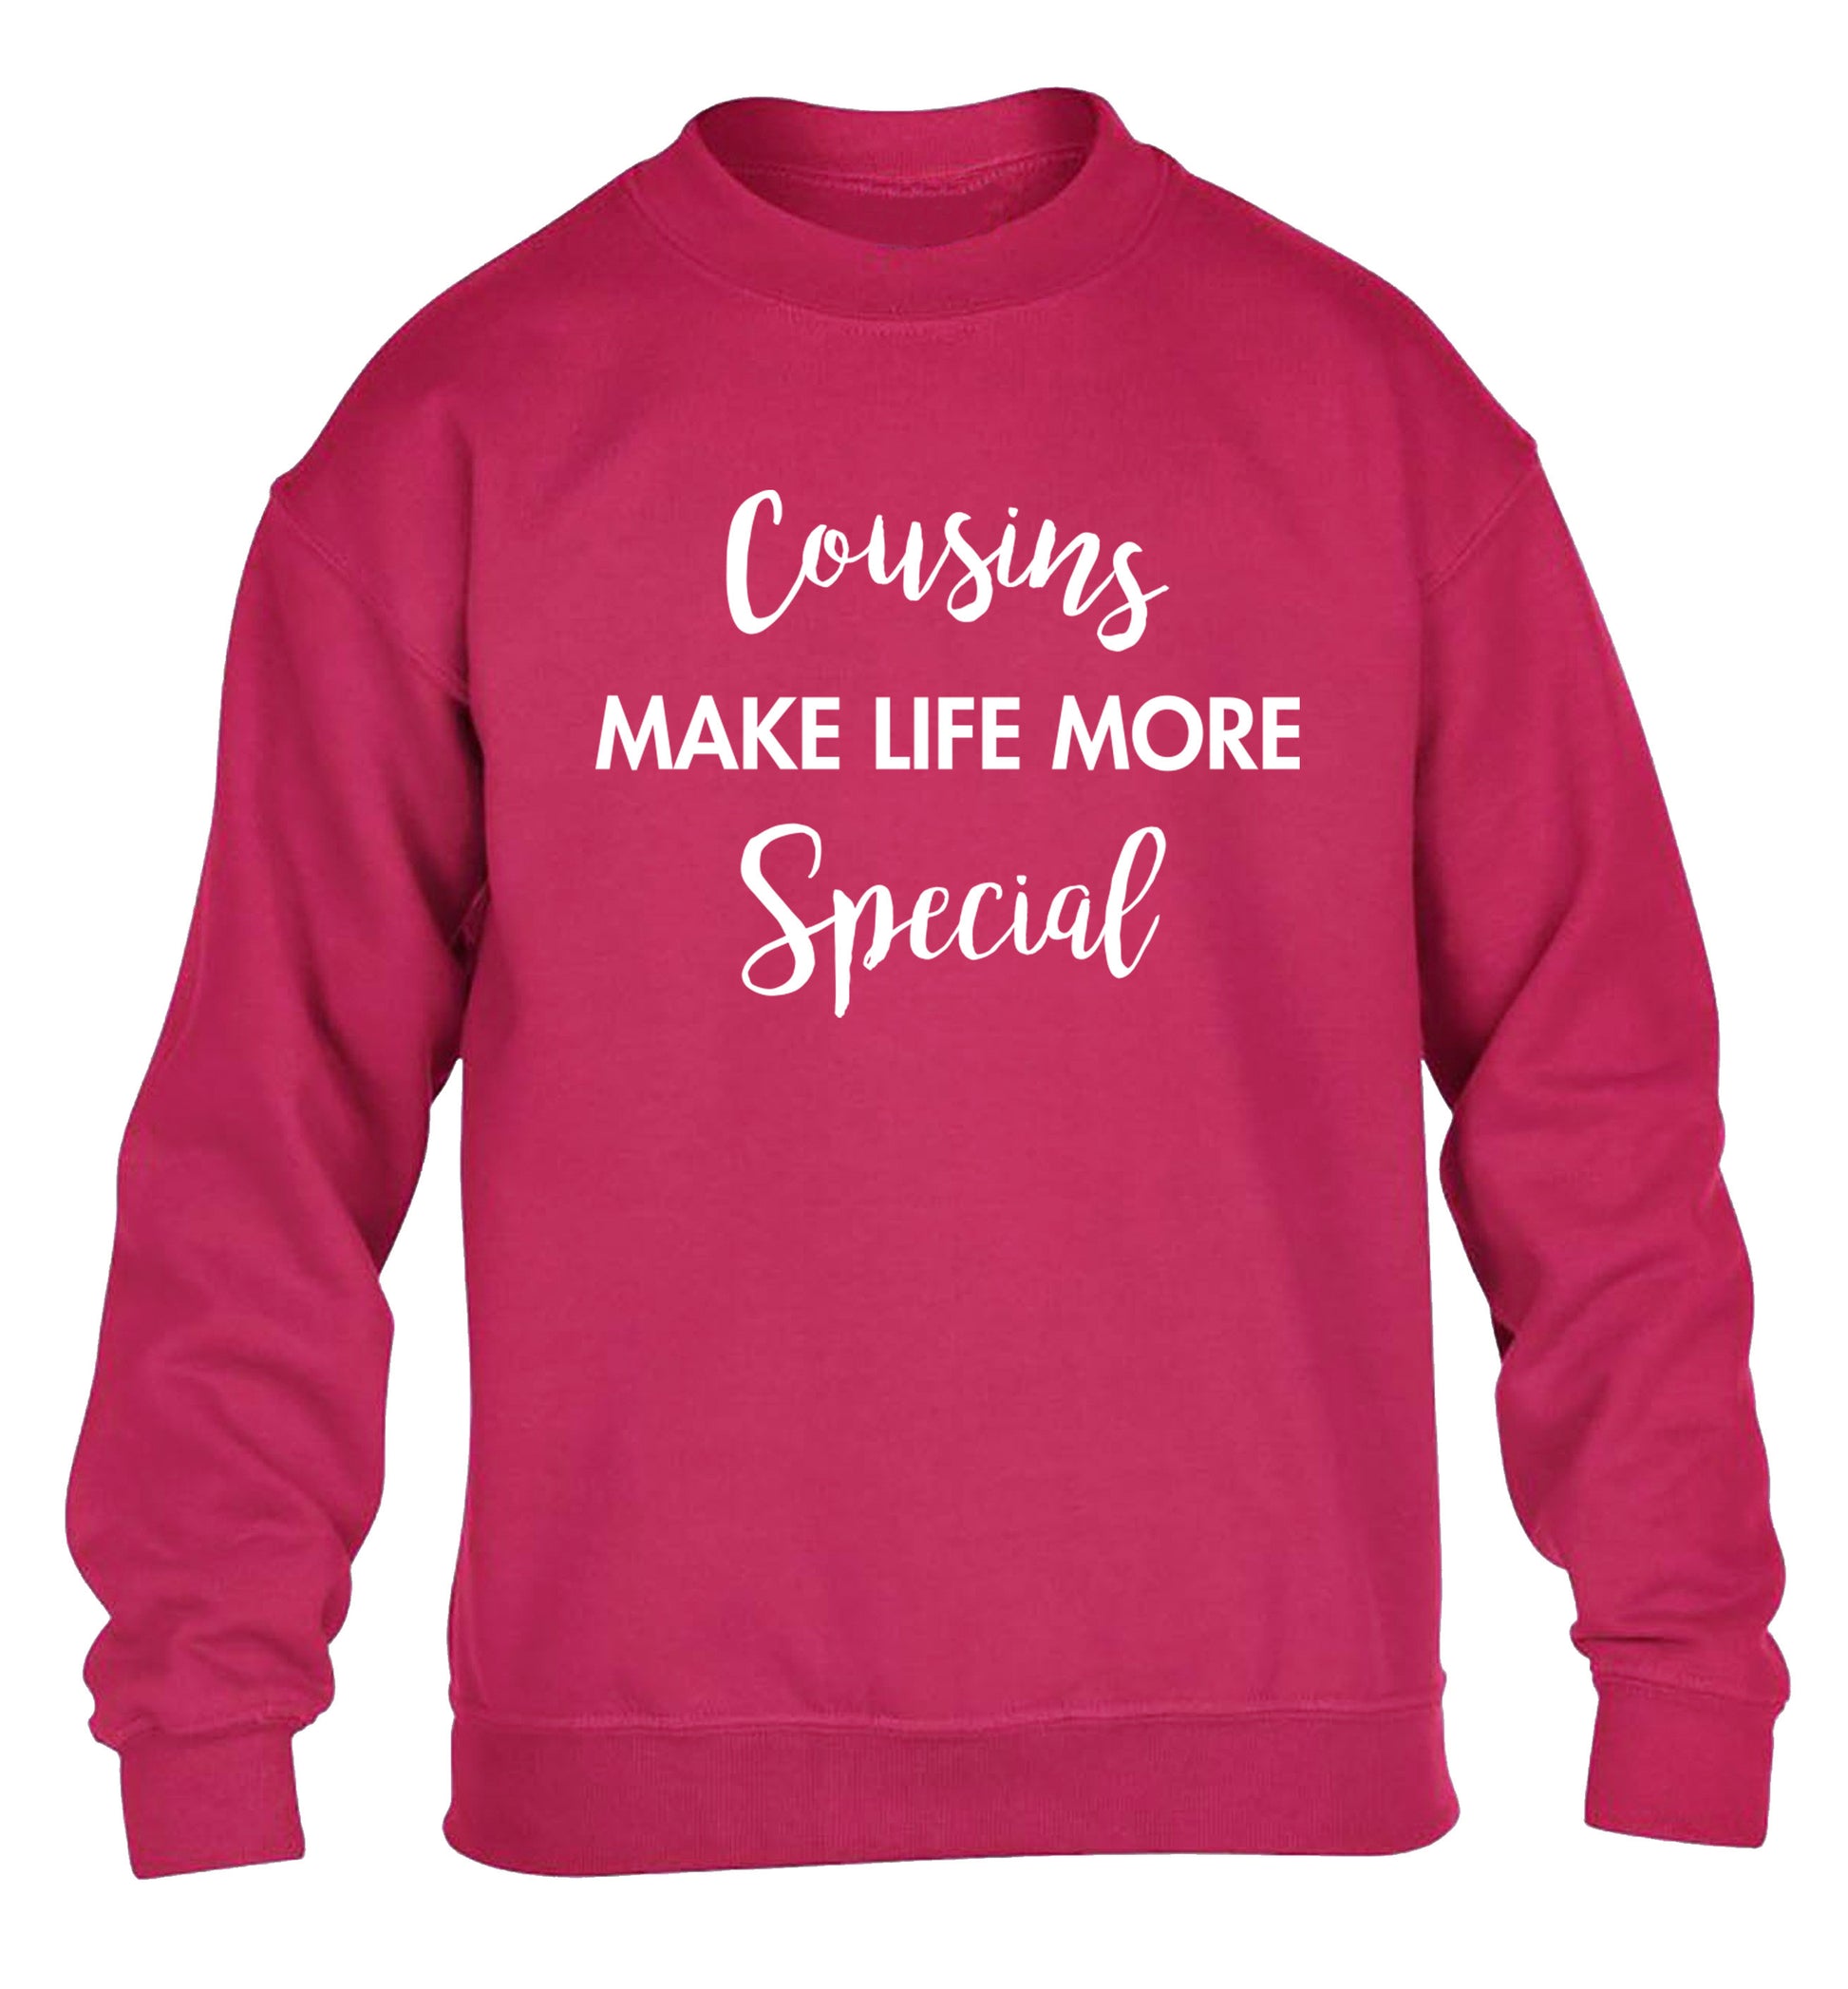 Cousins make life more special children's pink sweater 12-14 Years